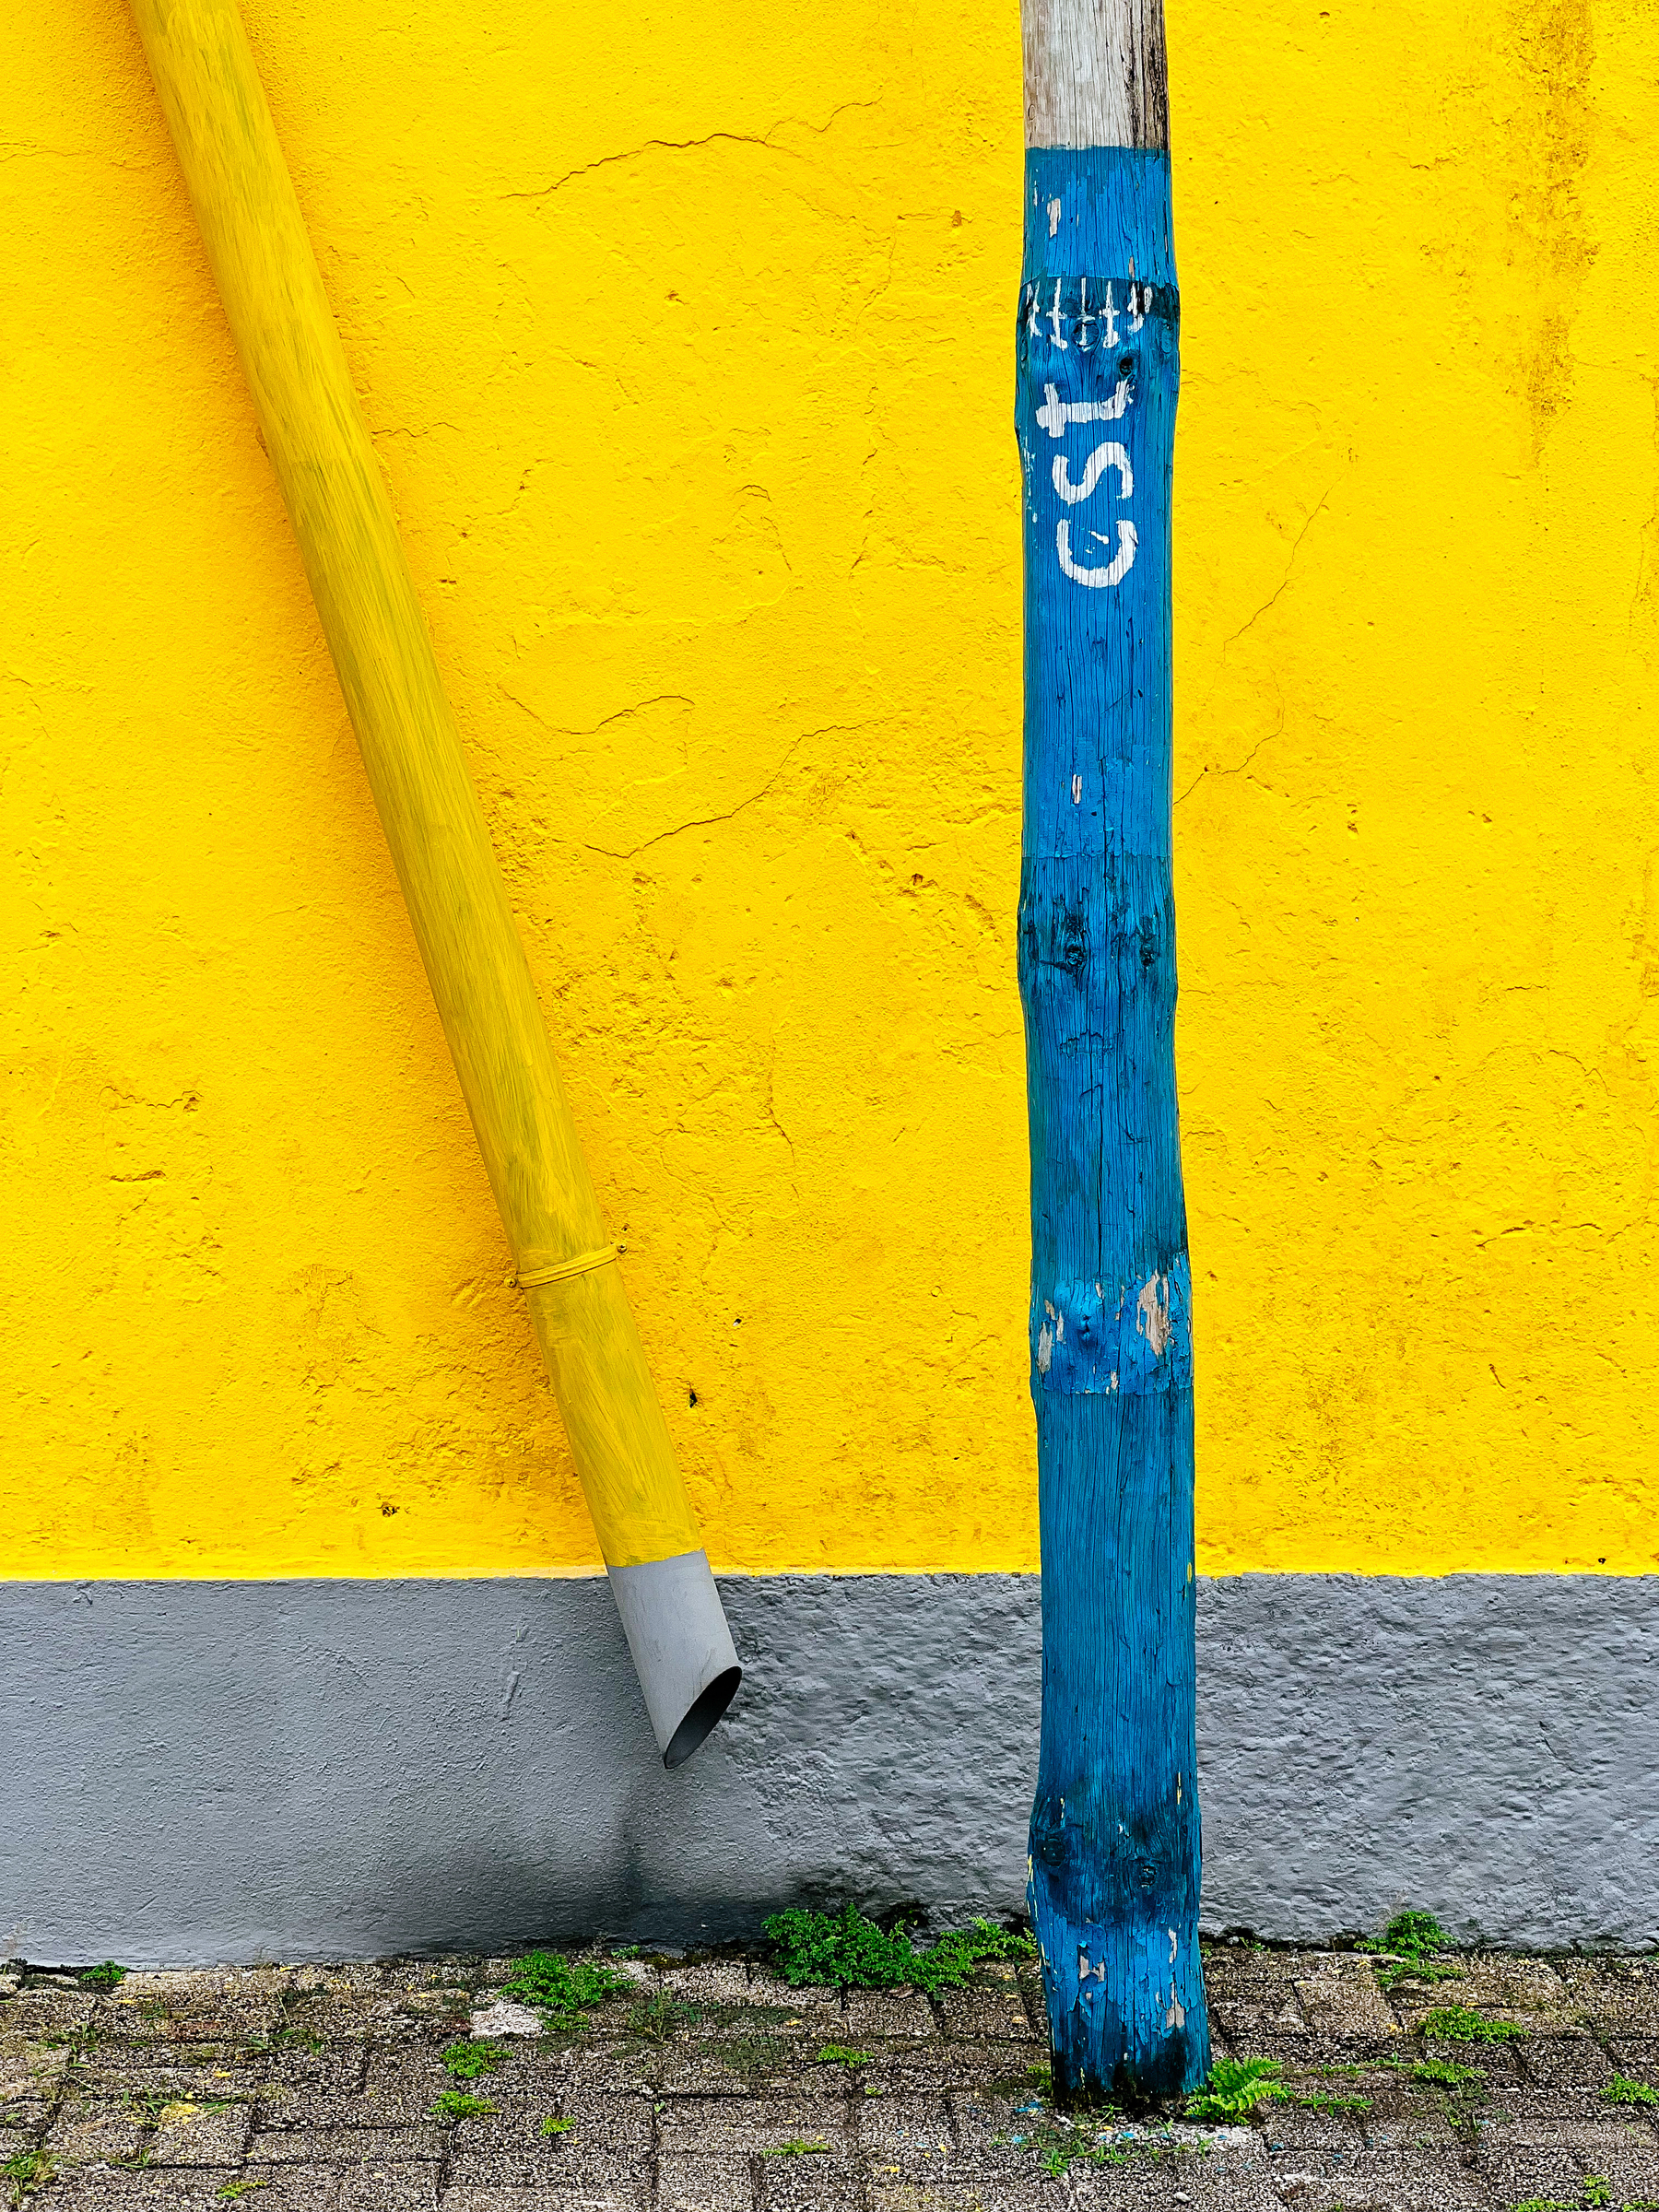 A yellow wall and a telephone pole painted in blue, with the letters “cst” on it. 